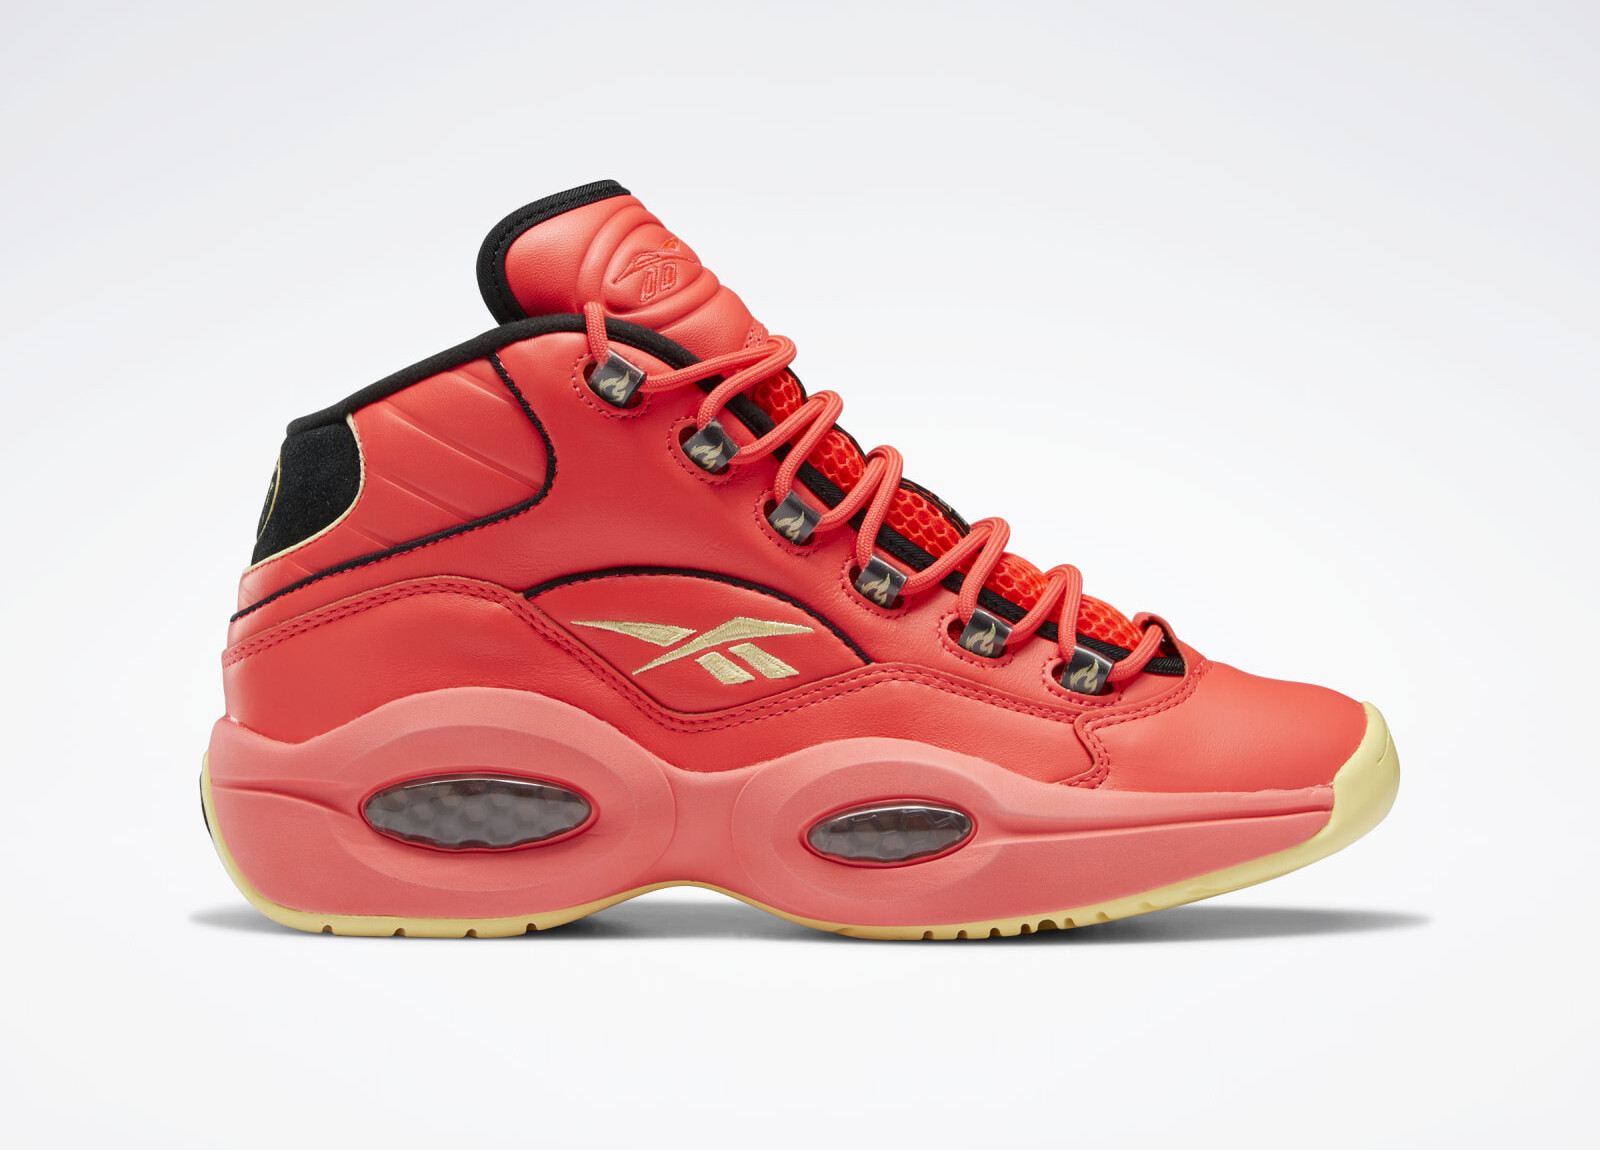 Reebok x Hot Ones
Question Mid
« The Last Dab »